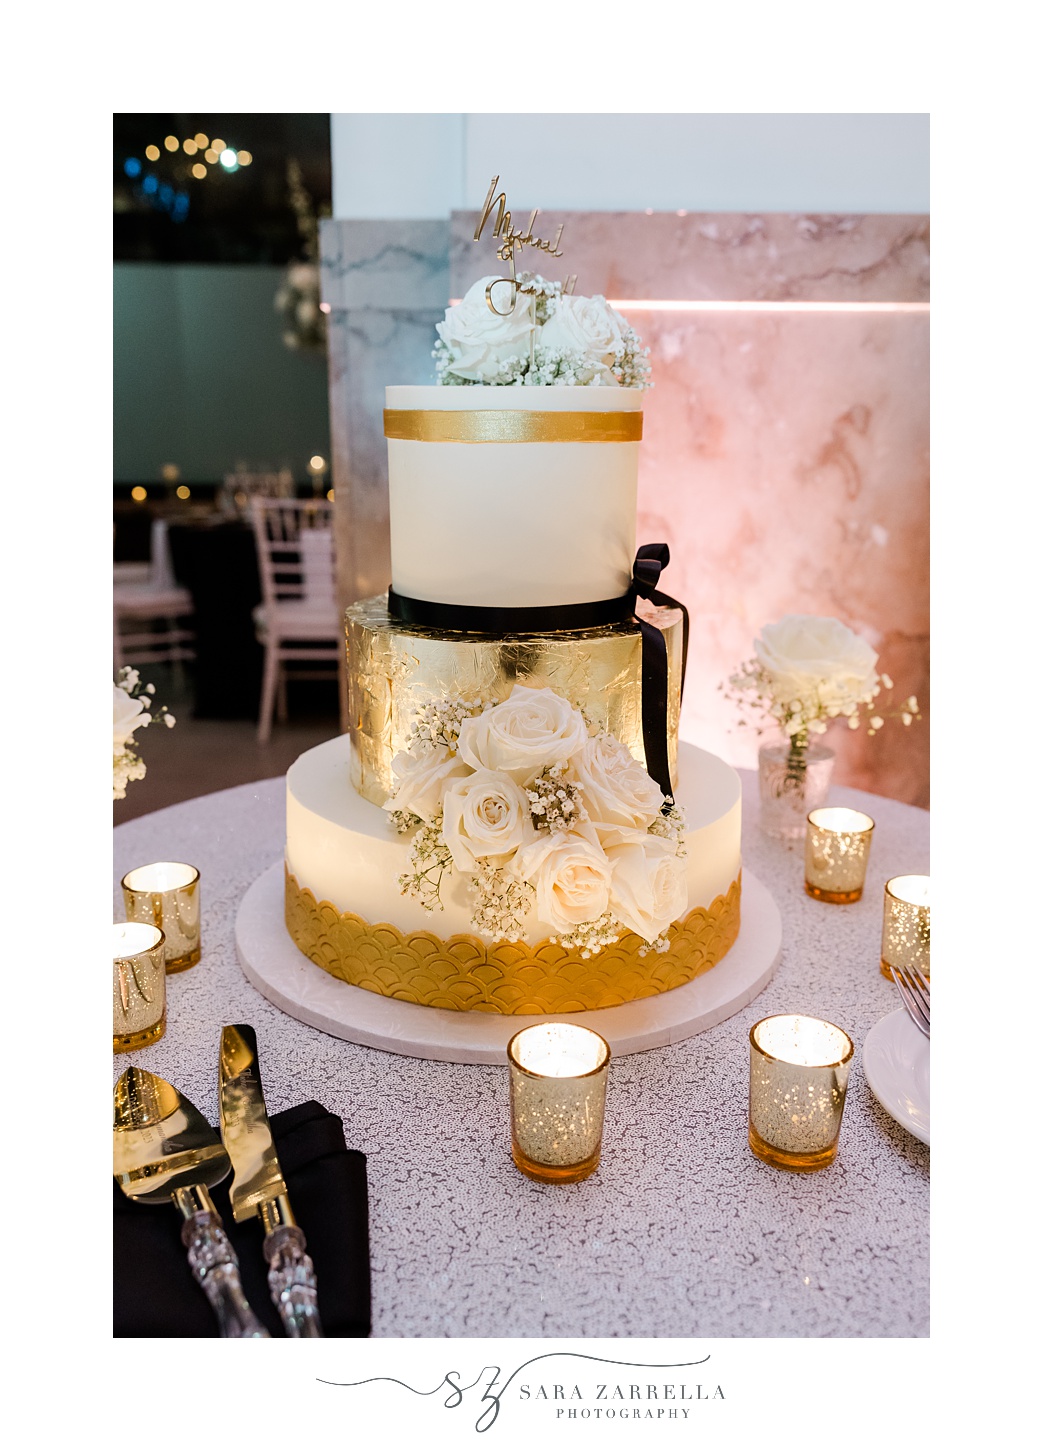 tiered wedding cake with gold and black details for New Year's Eve wedding reception at the Providence G